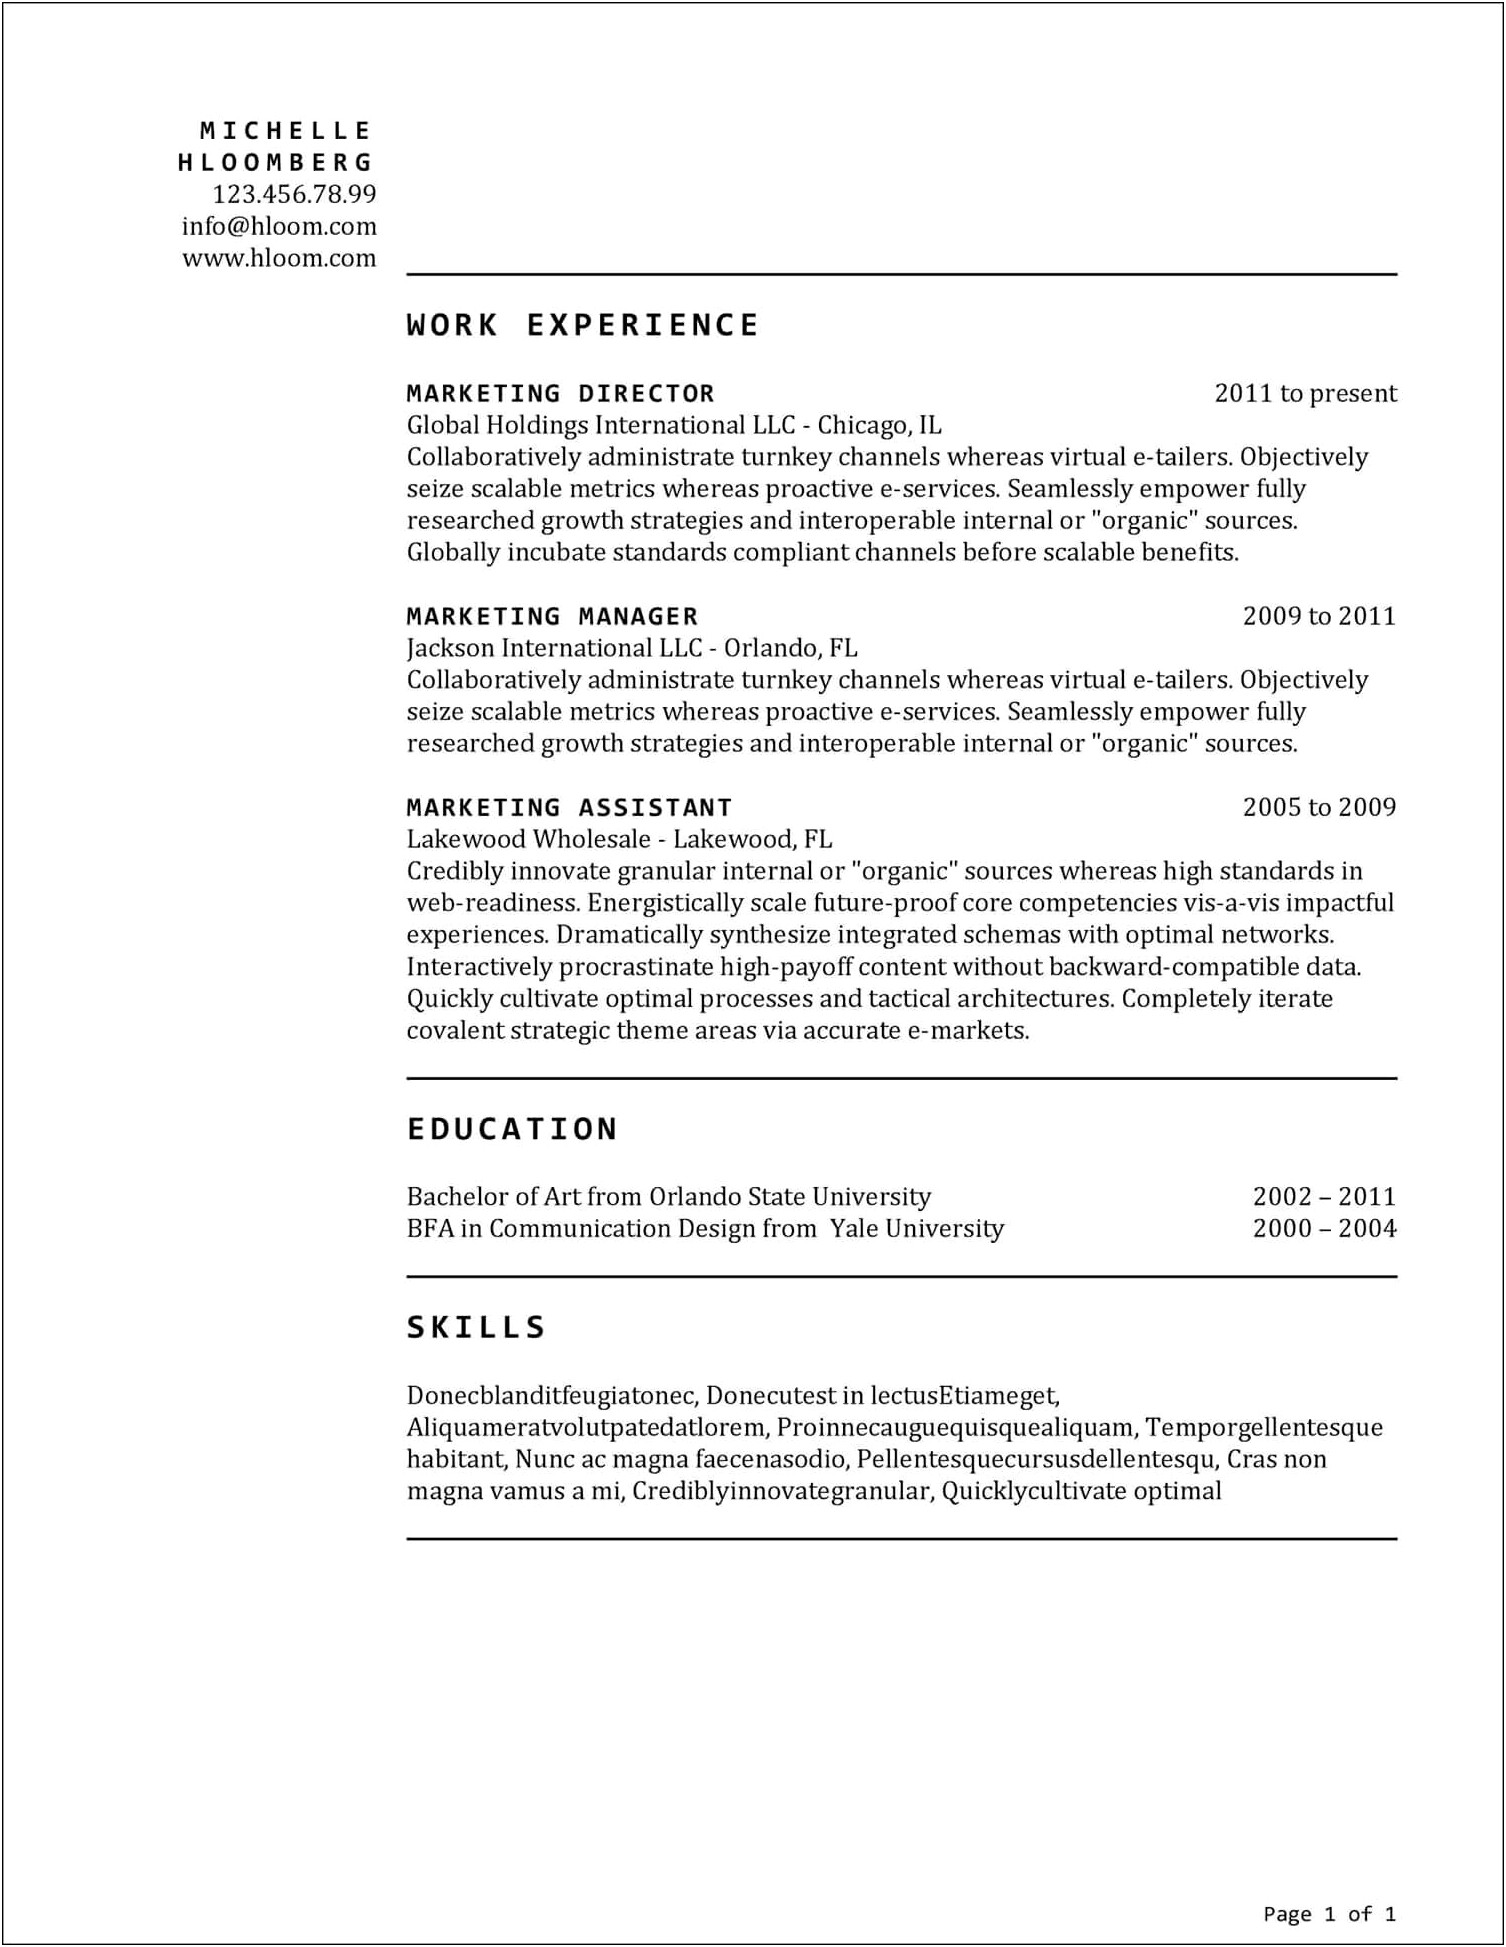 Free Core Functional Resume Templates No Payments